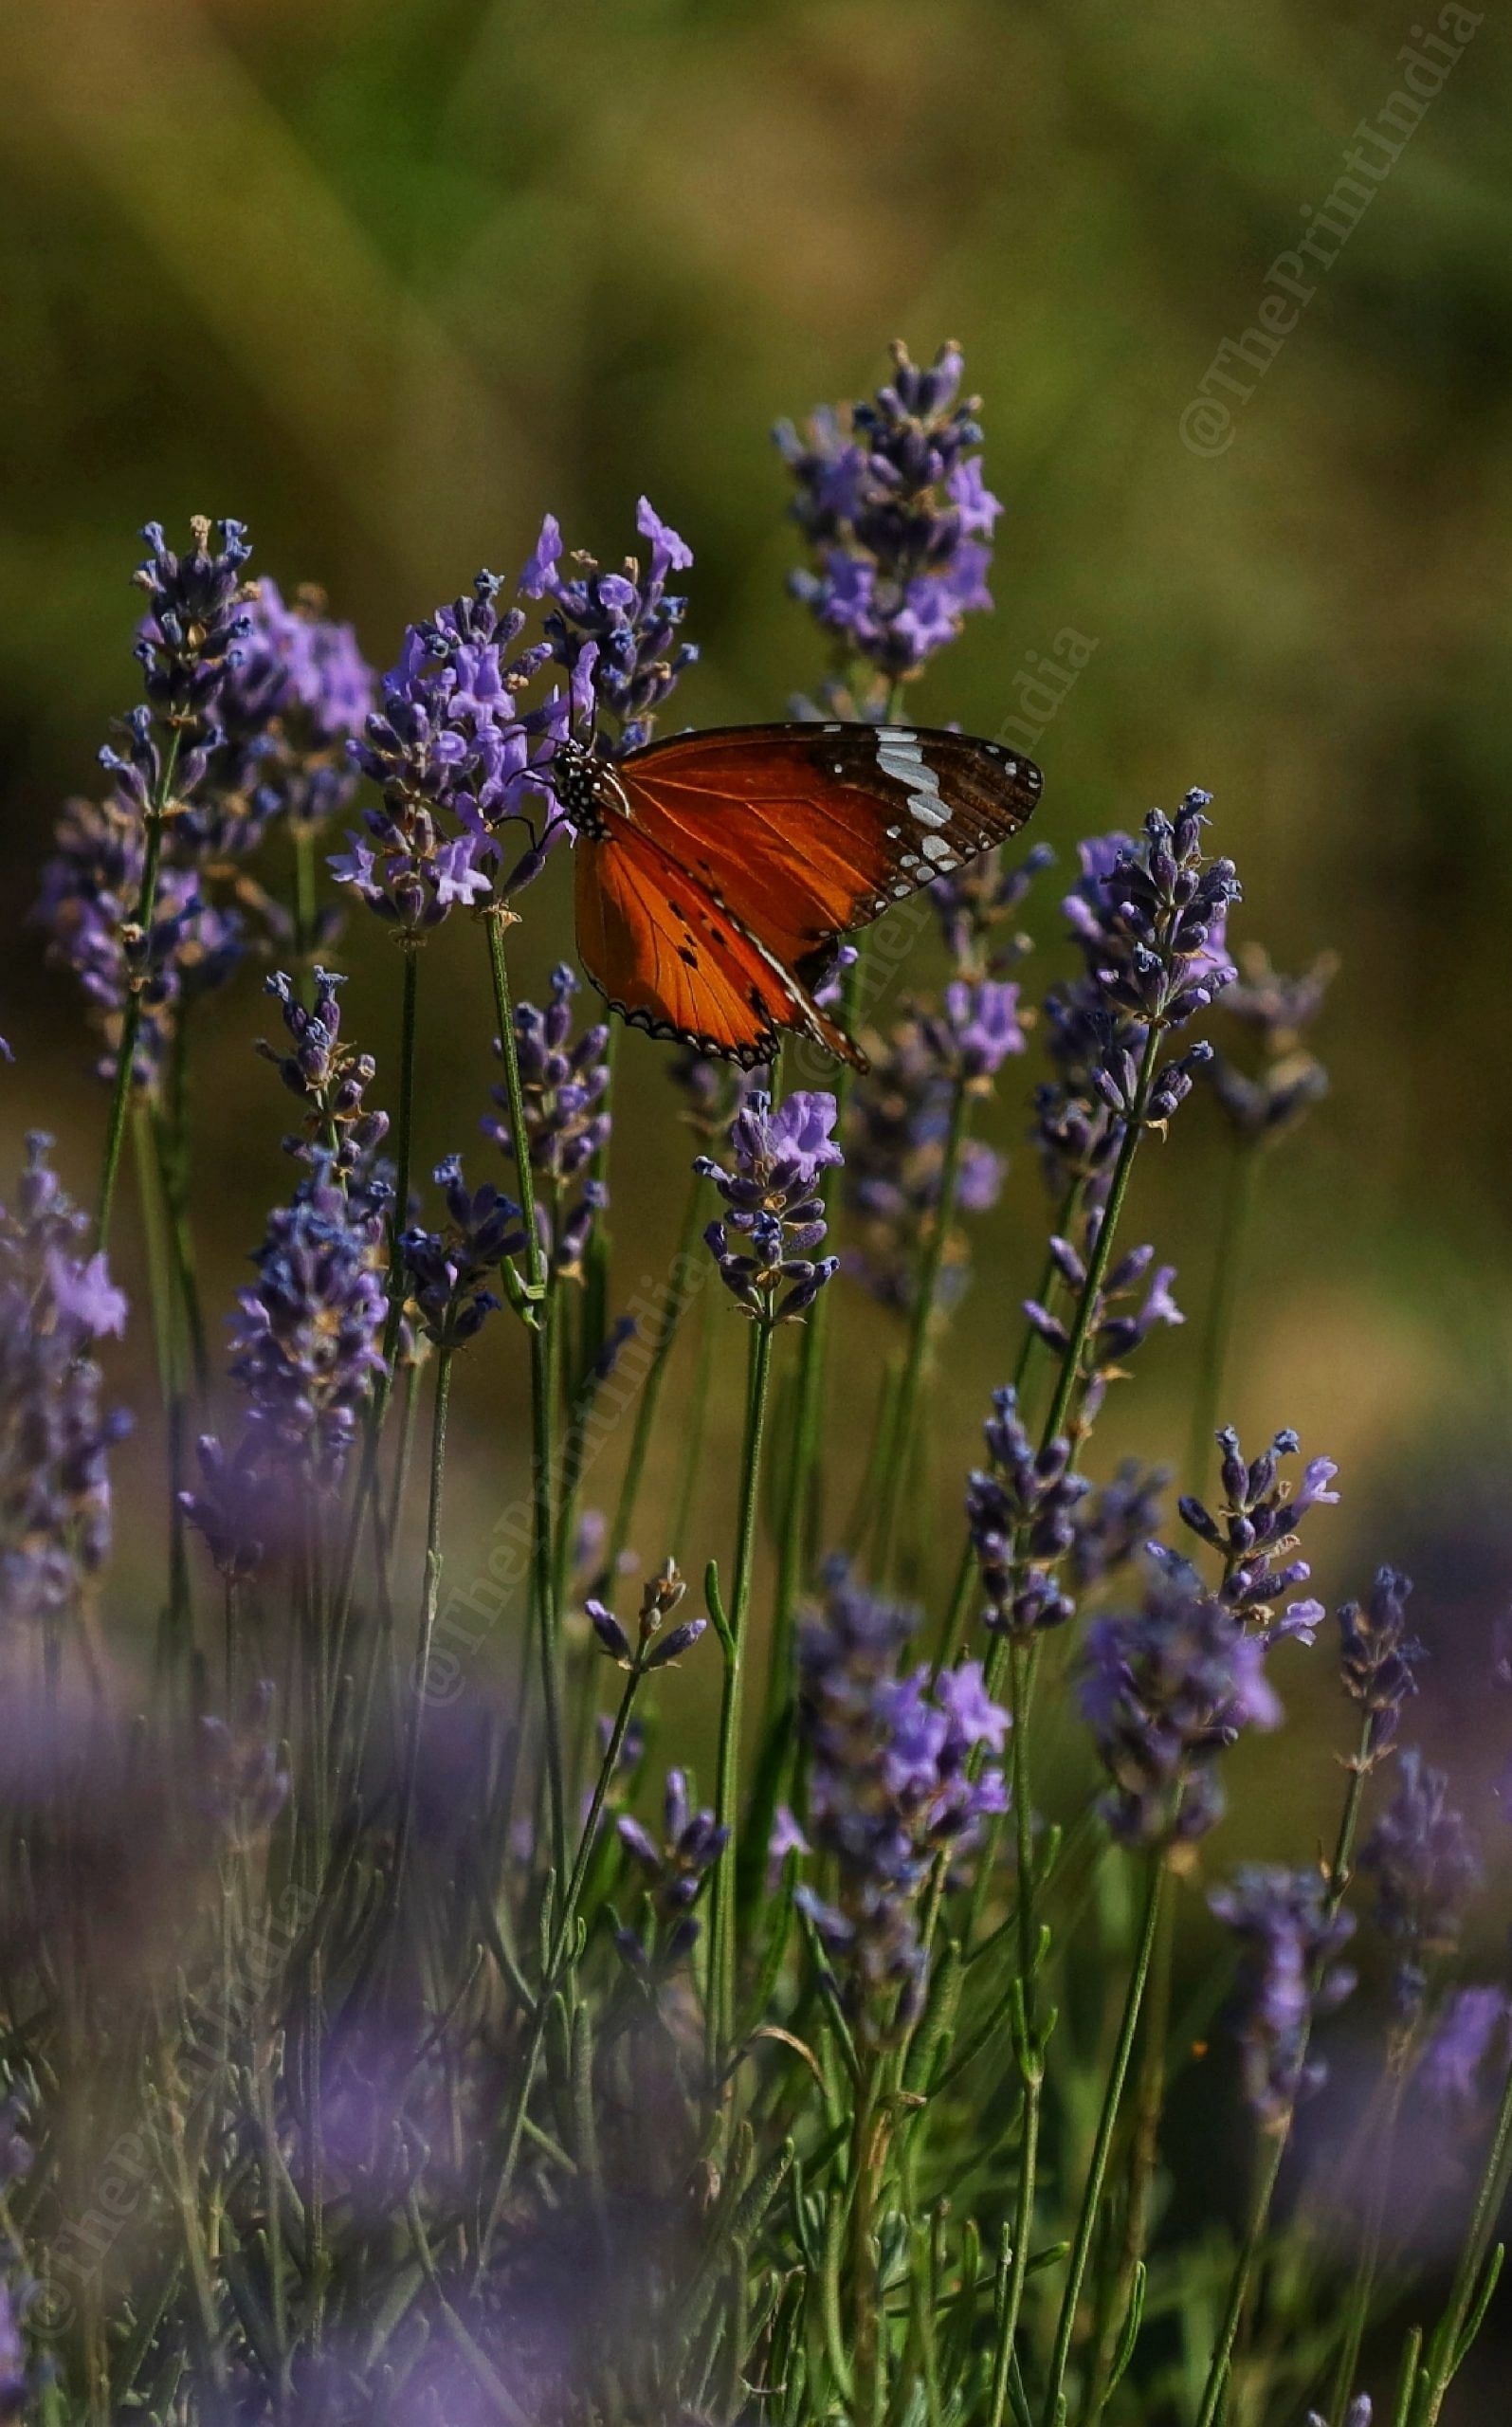 A butterfly perched on a Lavender sprig in Bhaderwah | Manisha Mondal | ThePrint